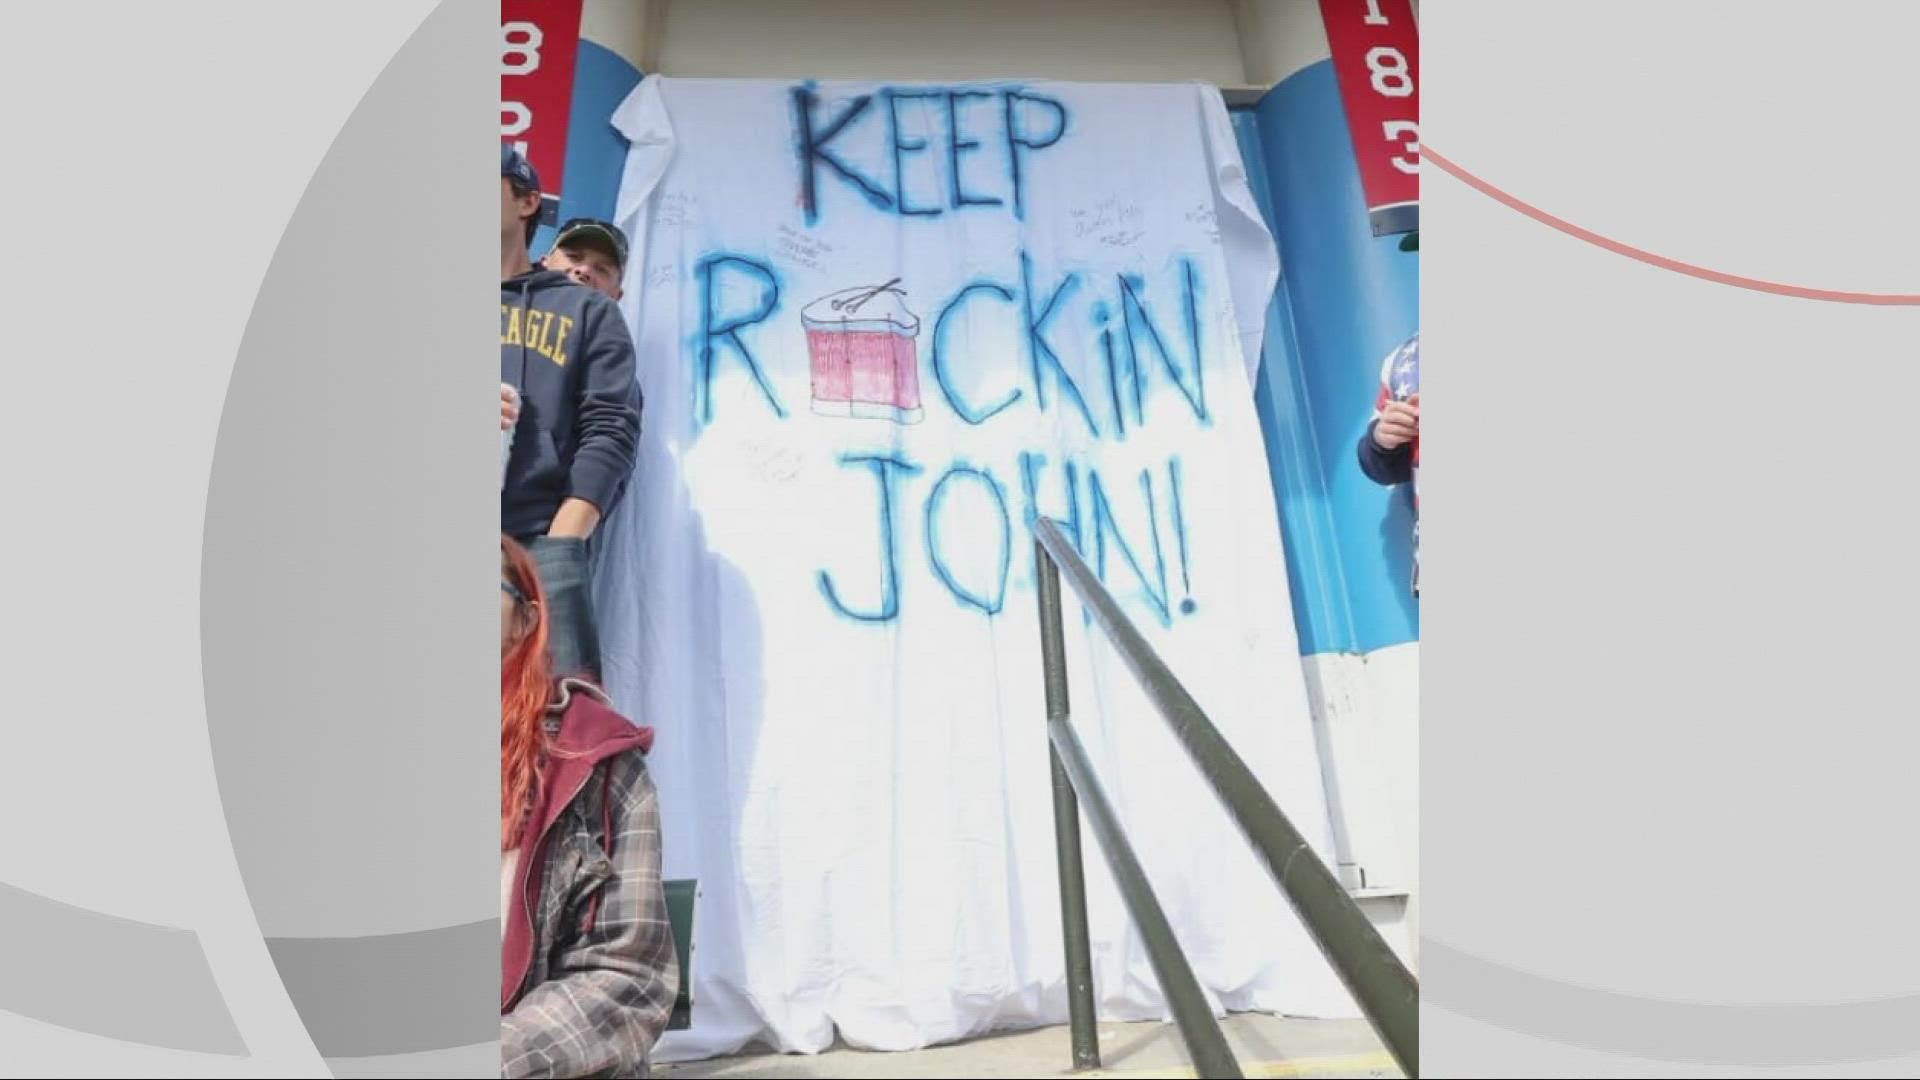 Drummer John Adams was honored with a sign at Cleveland Guardians playoff game on Saturday against the Tampa Bay Rays.